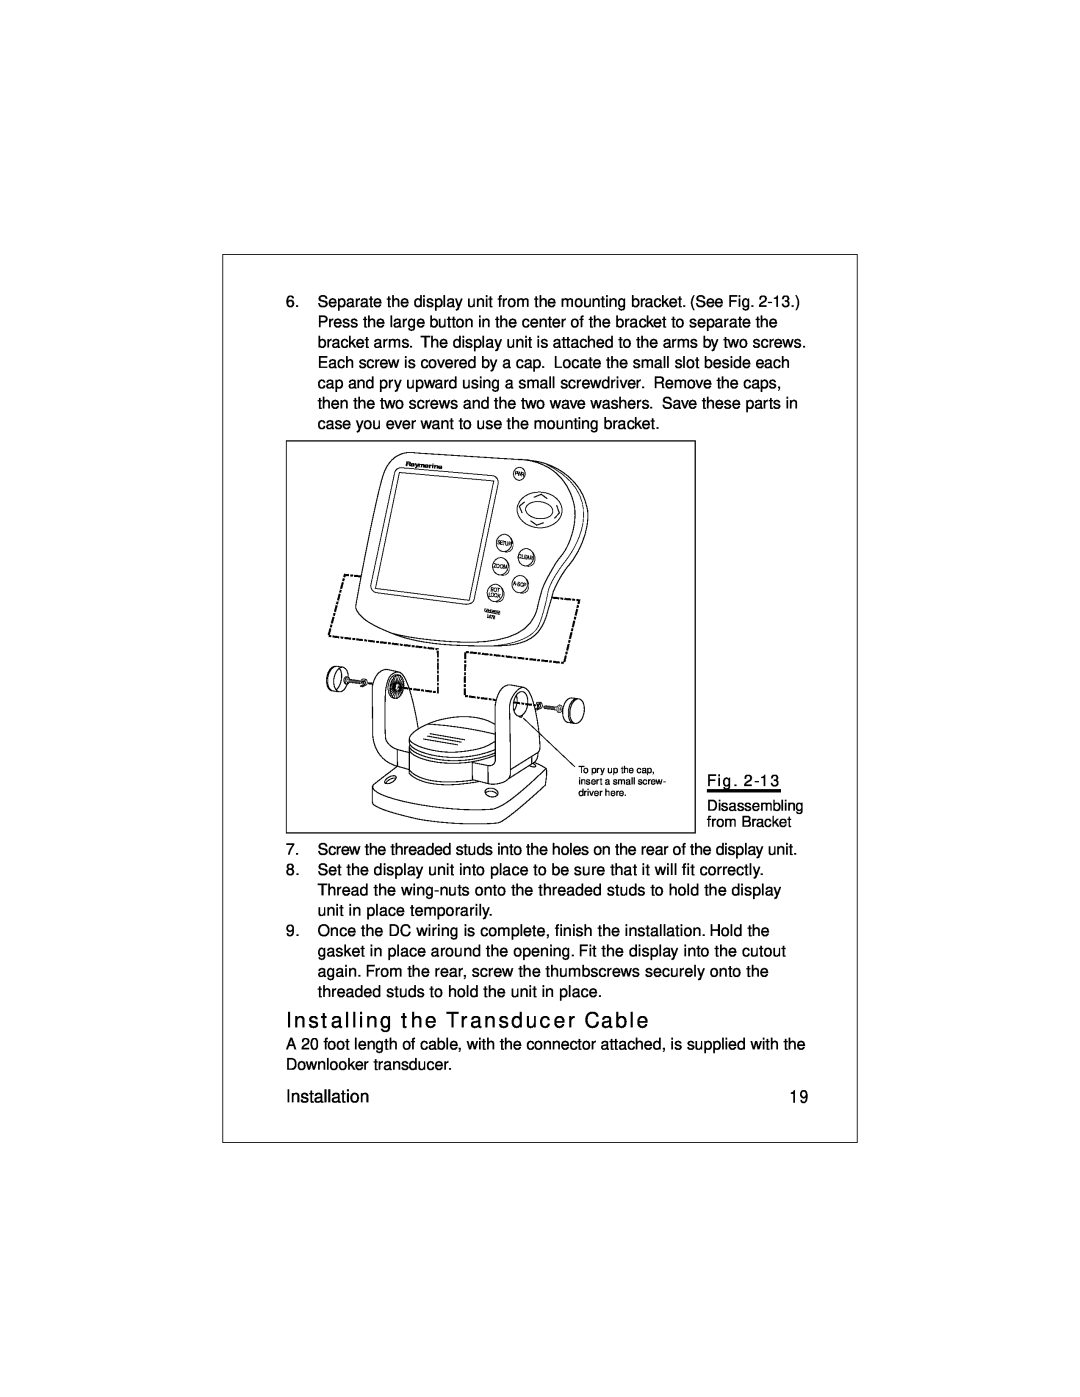 Raymarine L470 instruction manual Installing the Transducer Cable, Installation, Disassembling from Bracket 